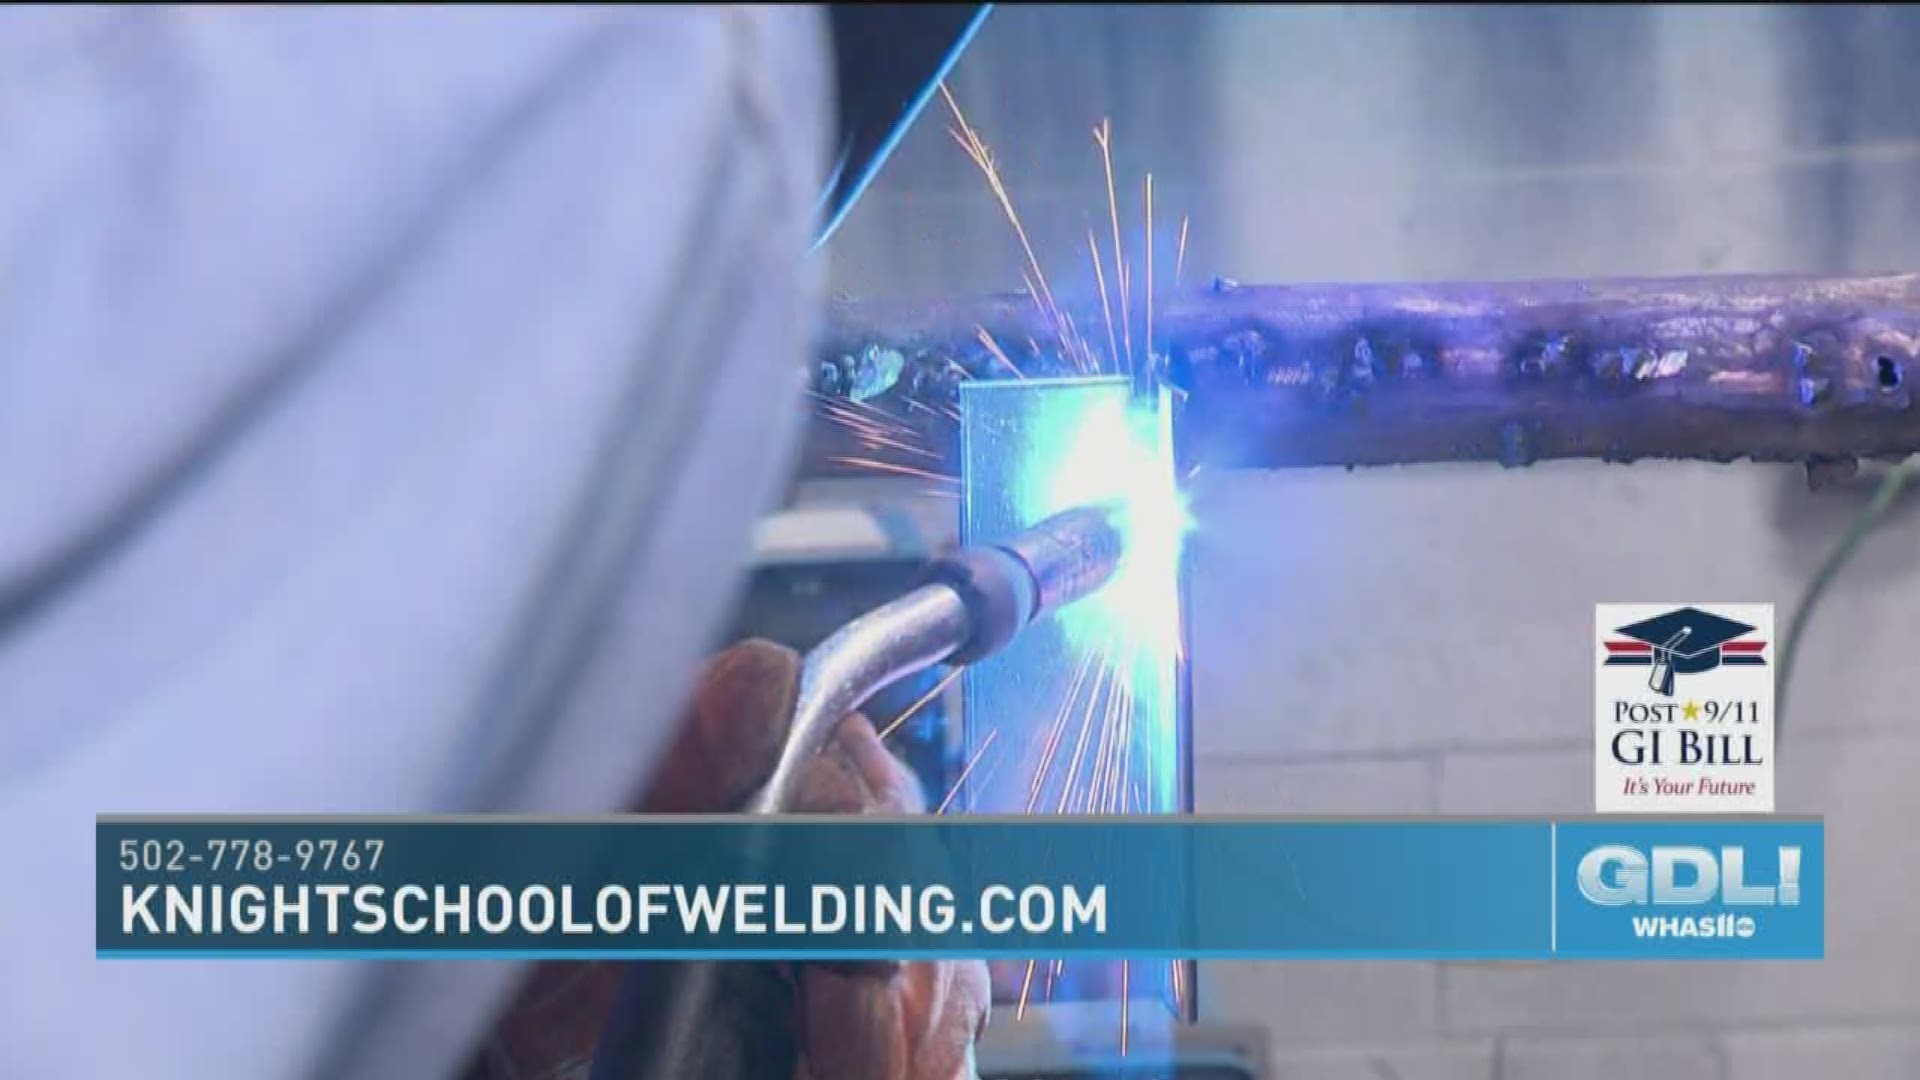 For more information, call 502-778-9767 of go to KnightSchoolOfWelding.com.